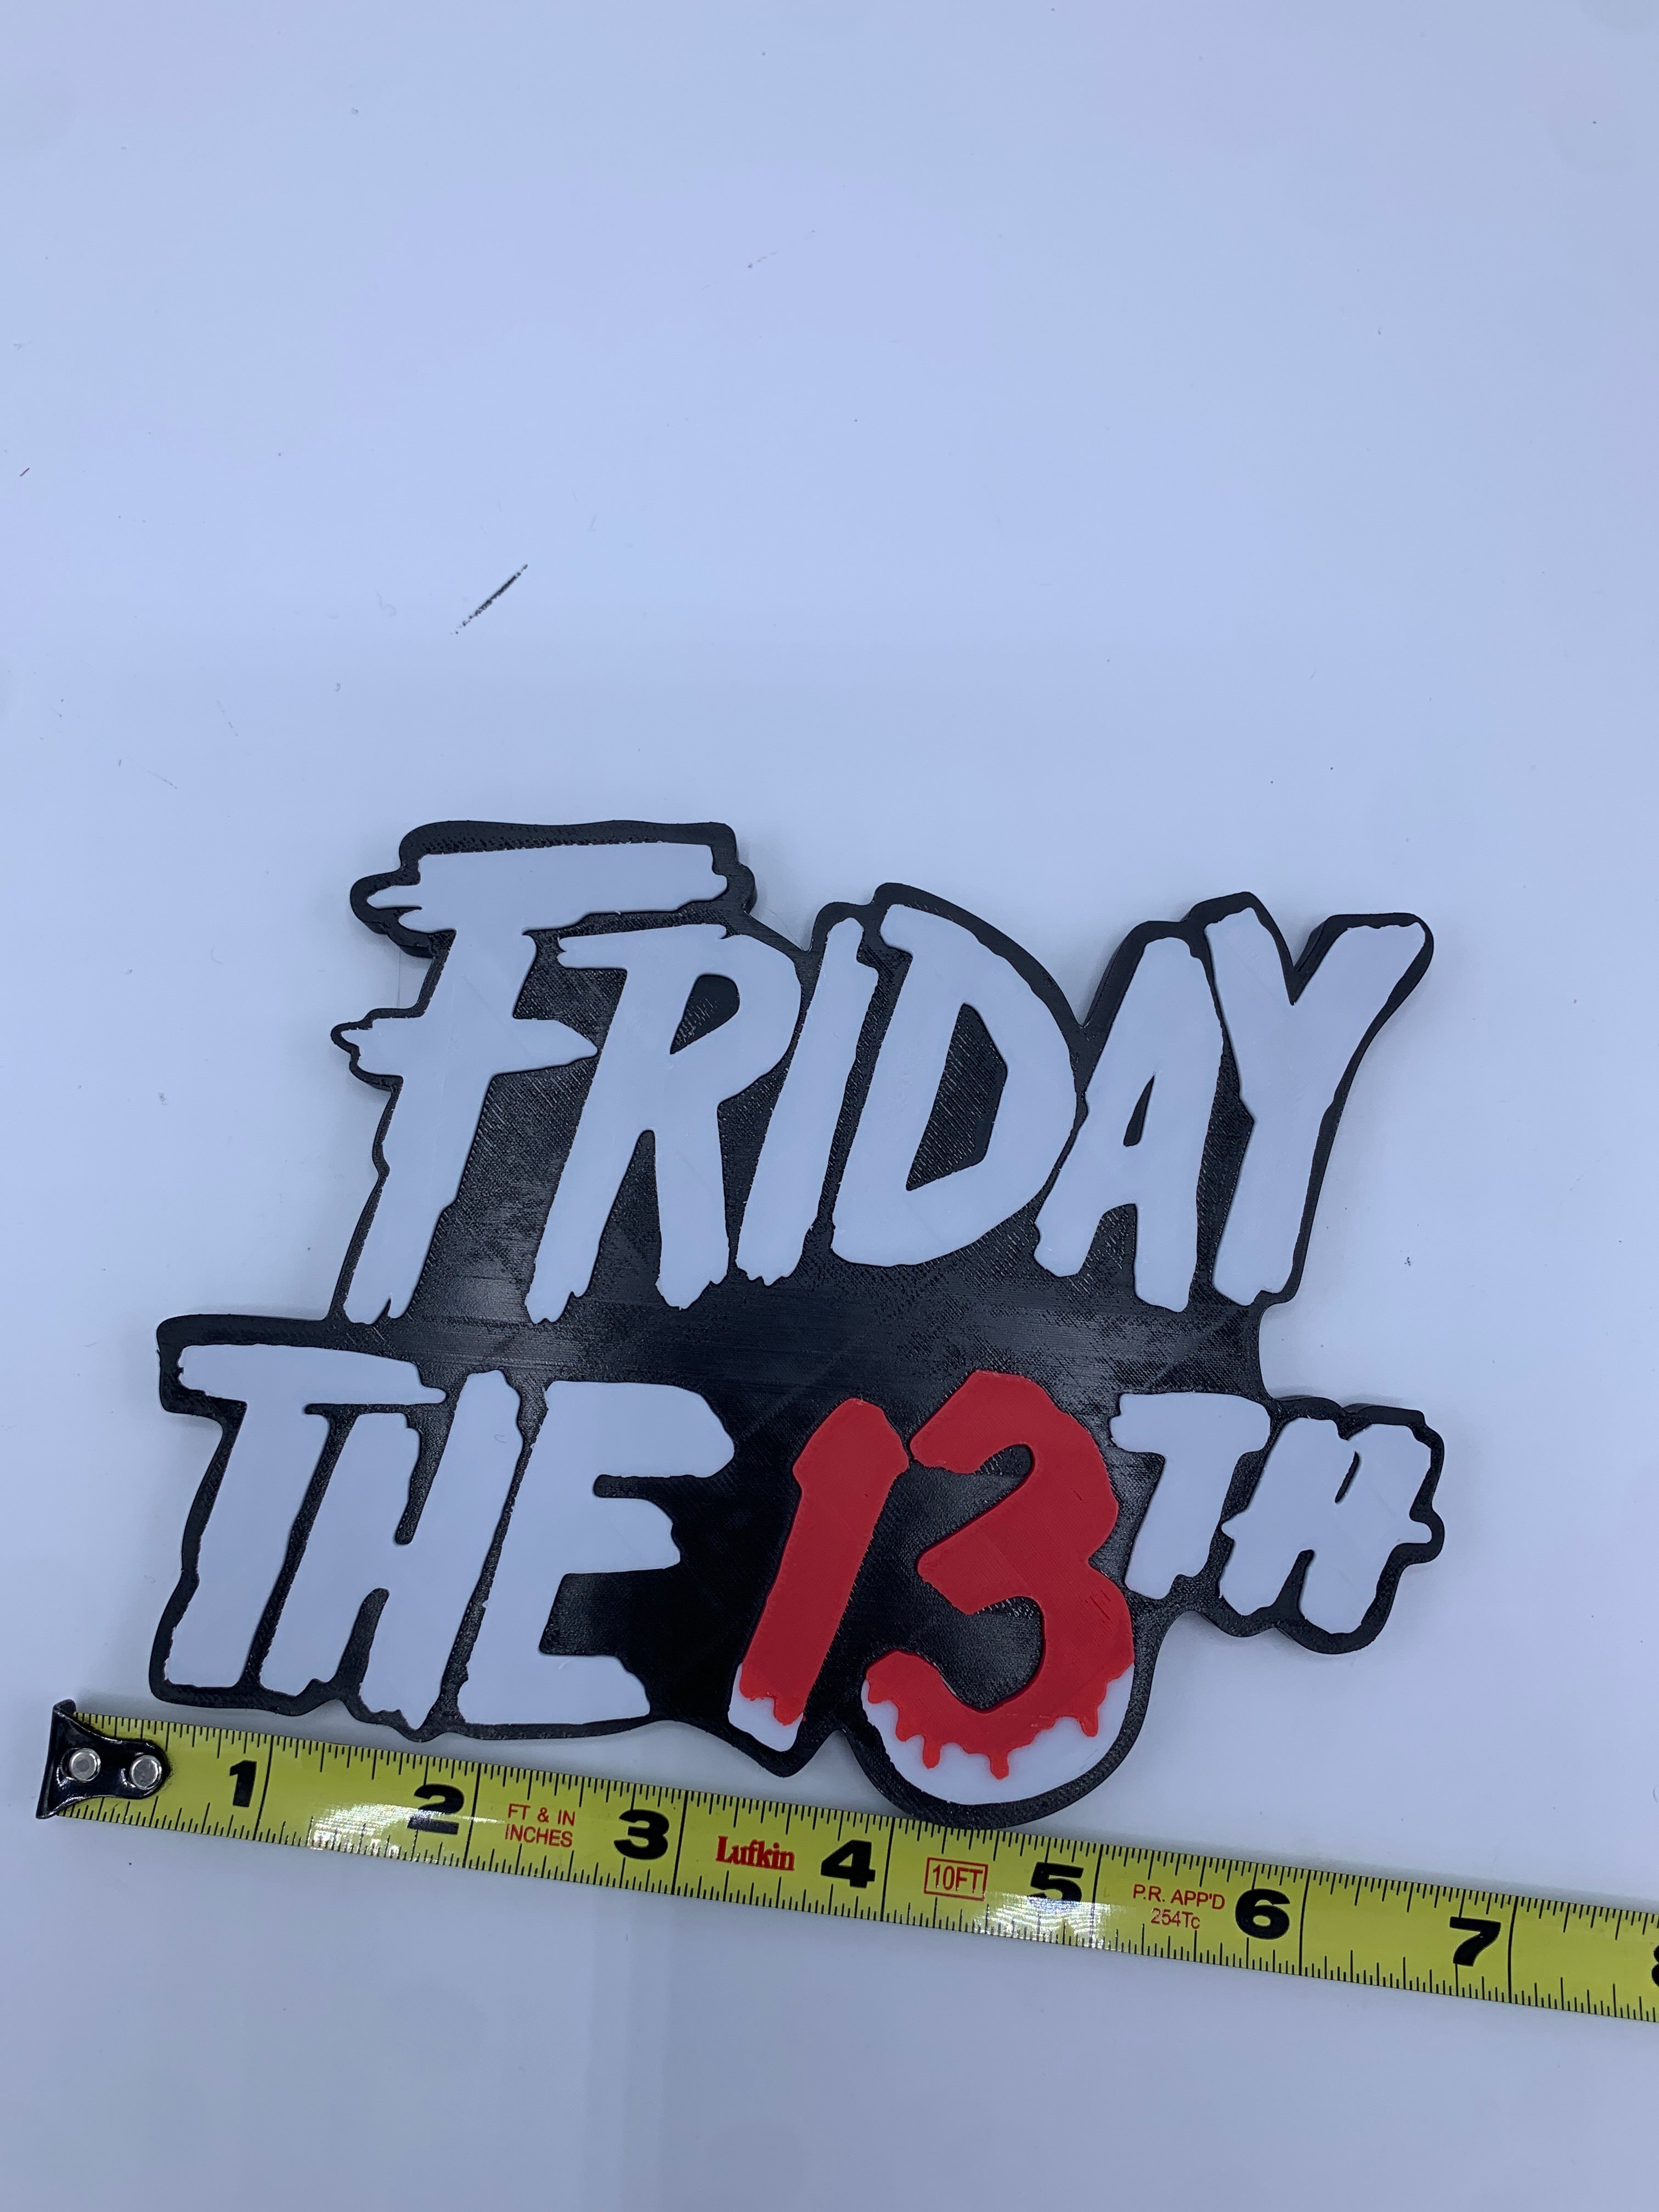 Friday the 13th sign